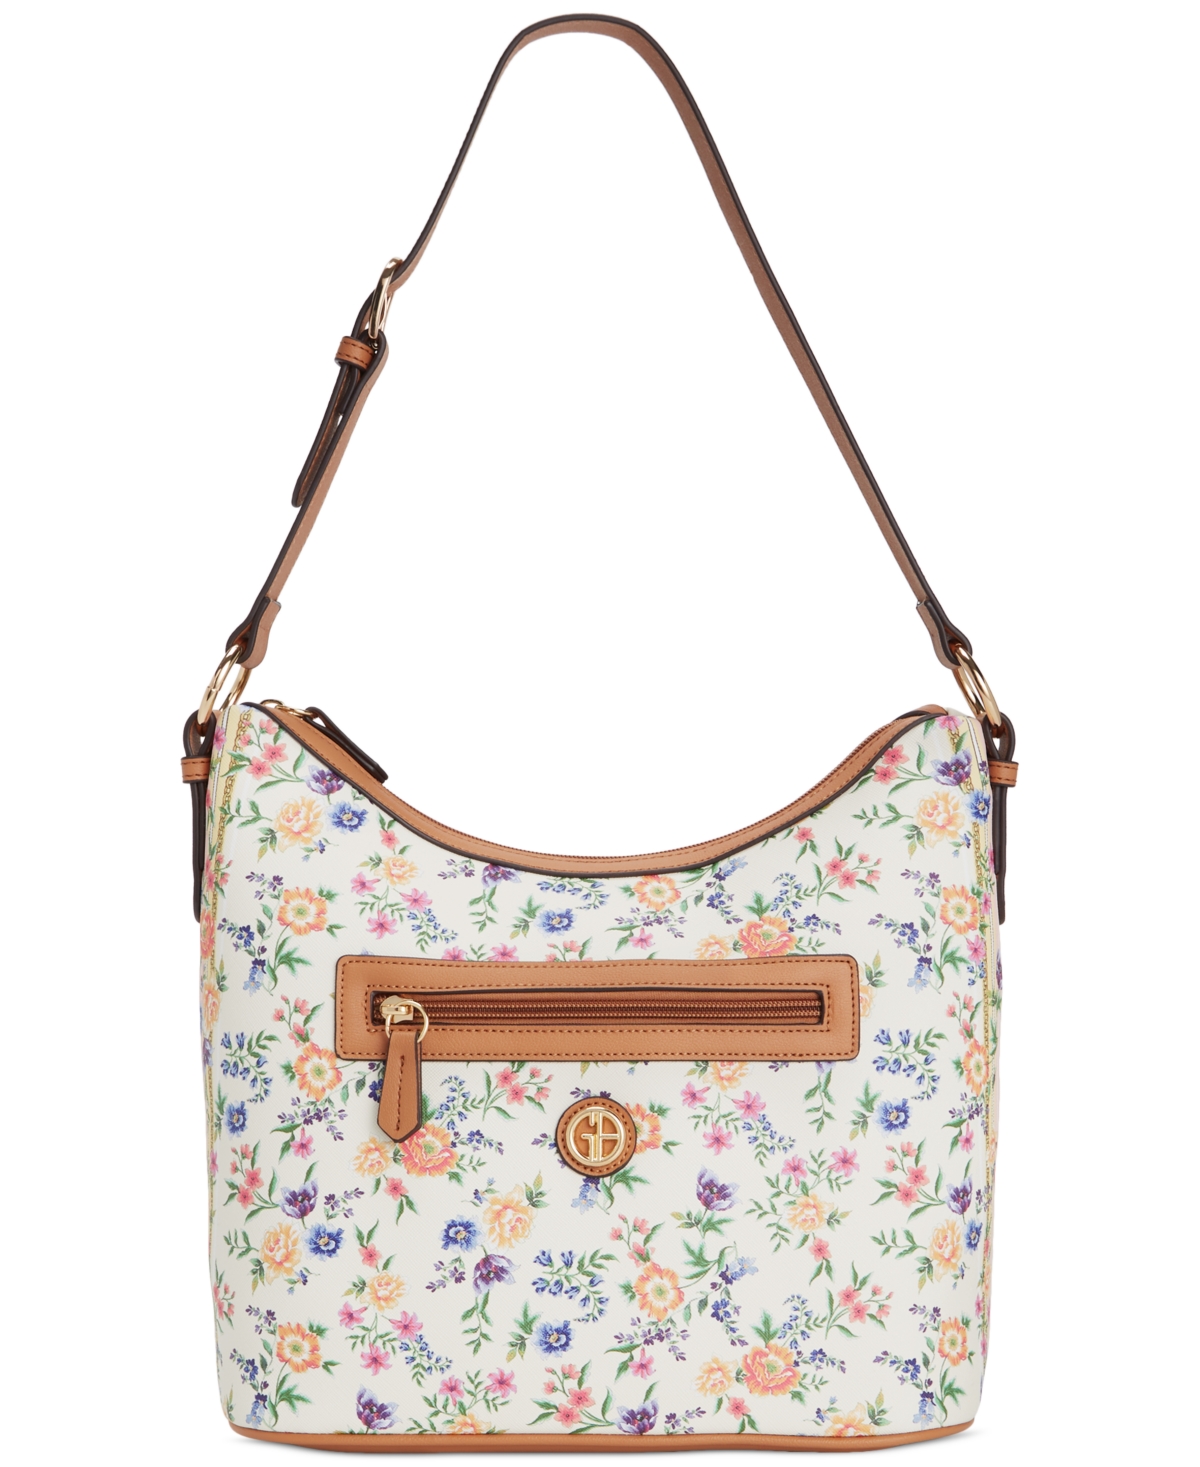 Saffiano Pastel Floral Small Hobo, Created for Macy's - Floral Multi